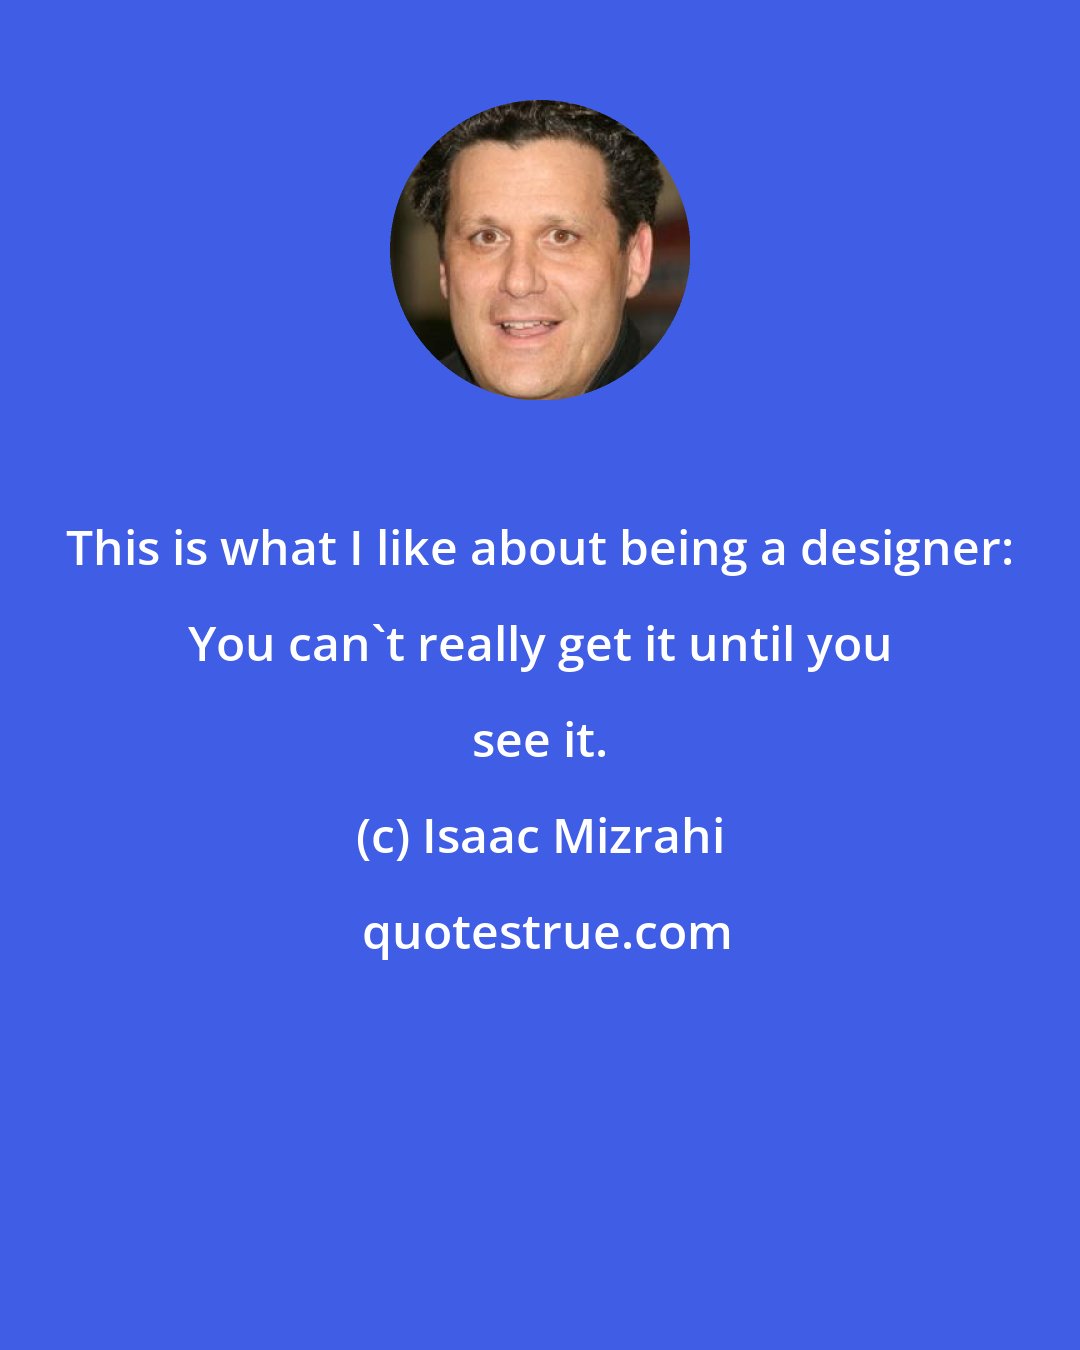 Isaac Mizrahi: This is what I like about being a designer: You can't really get it until you see it.